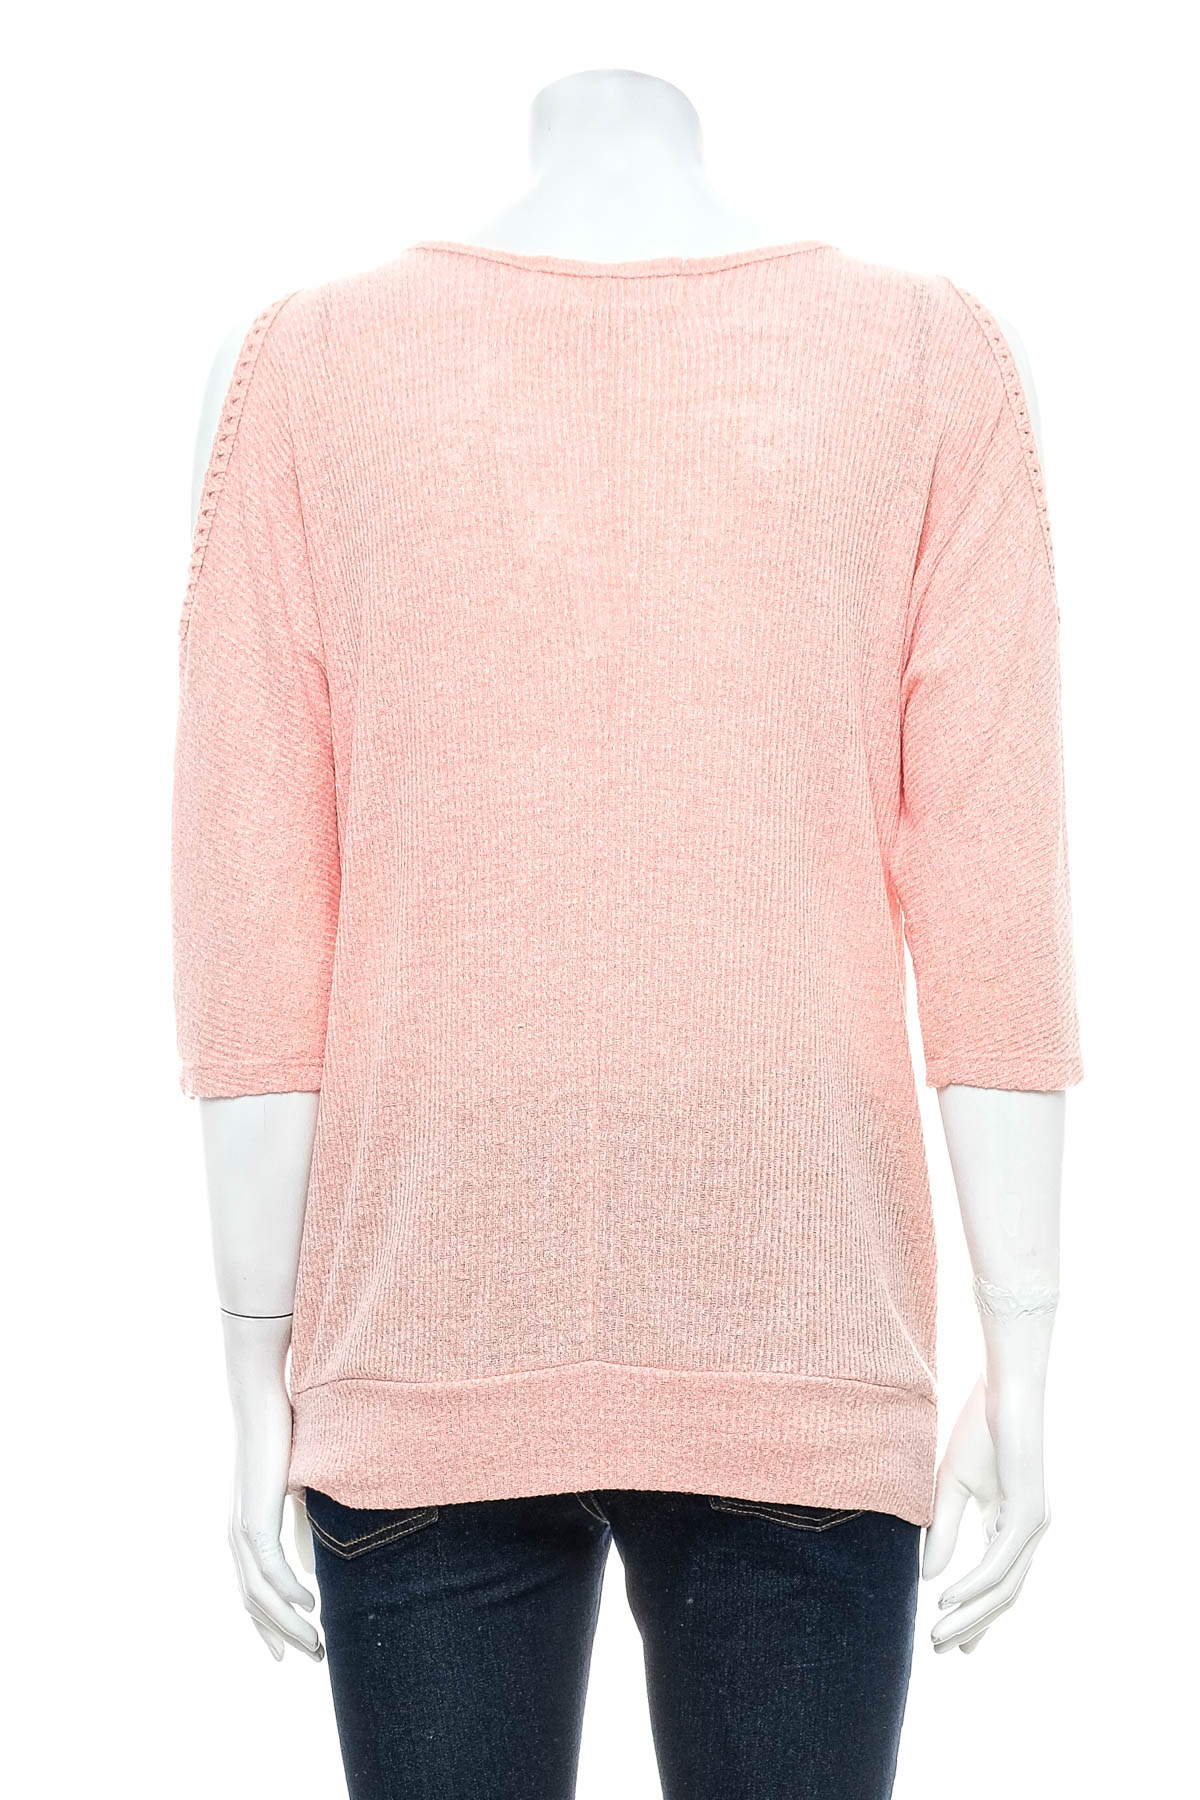 Women's sweater - French Laundry - 1